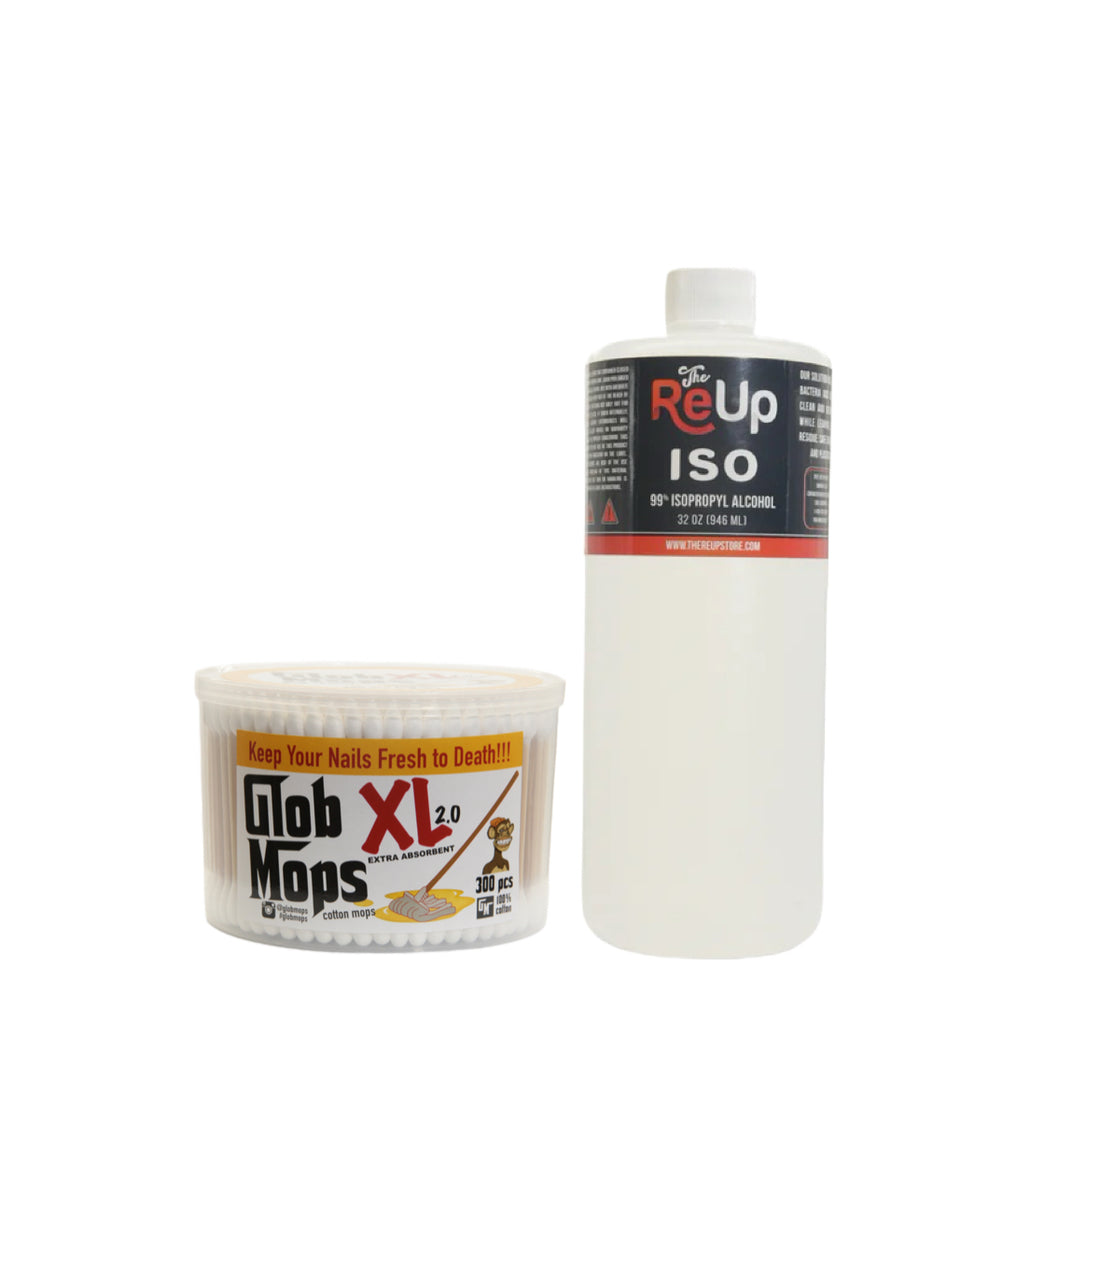 The Re Up 32oz ISO and Glob Mops XL 2.0 Bundle